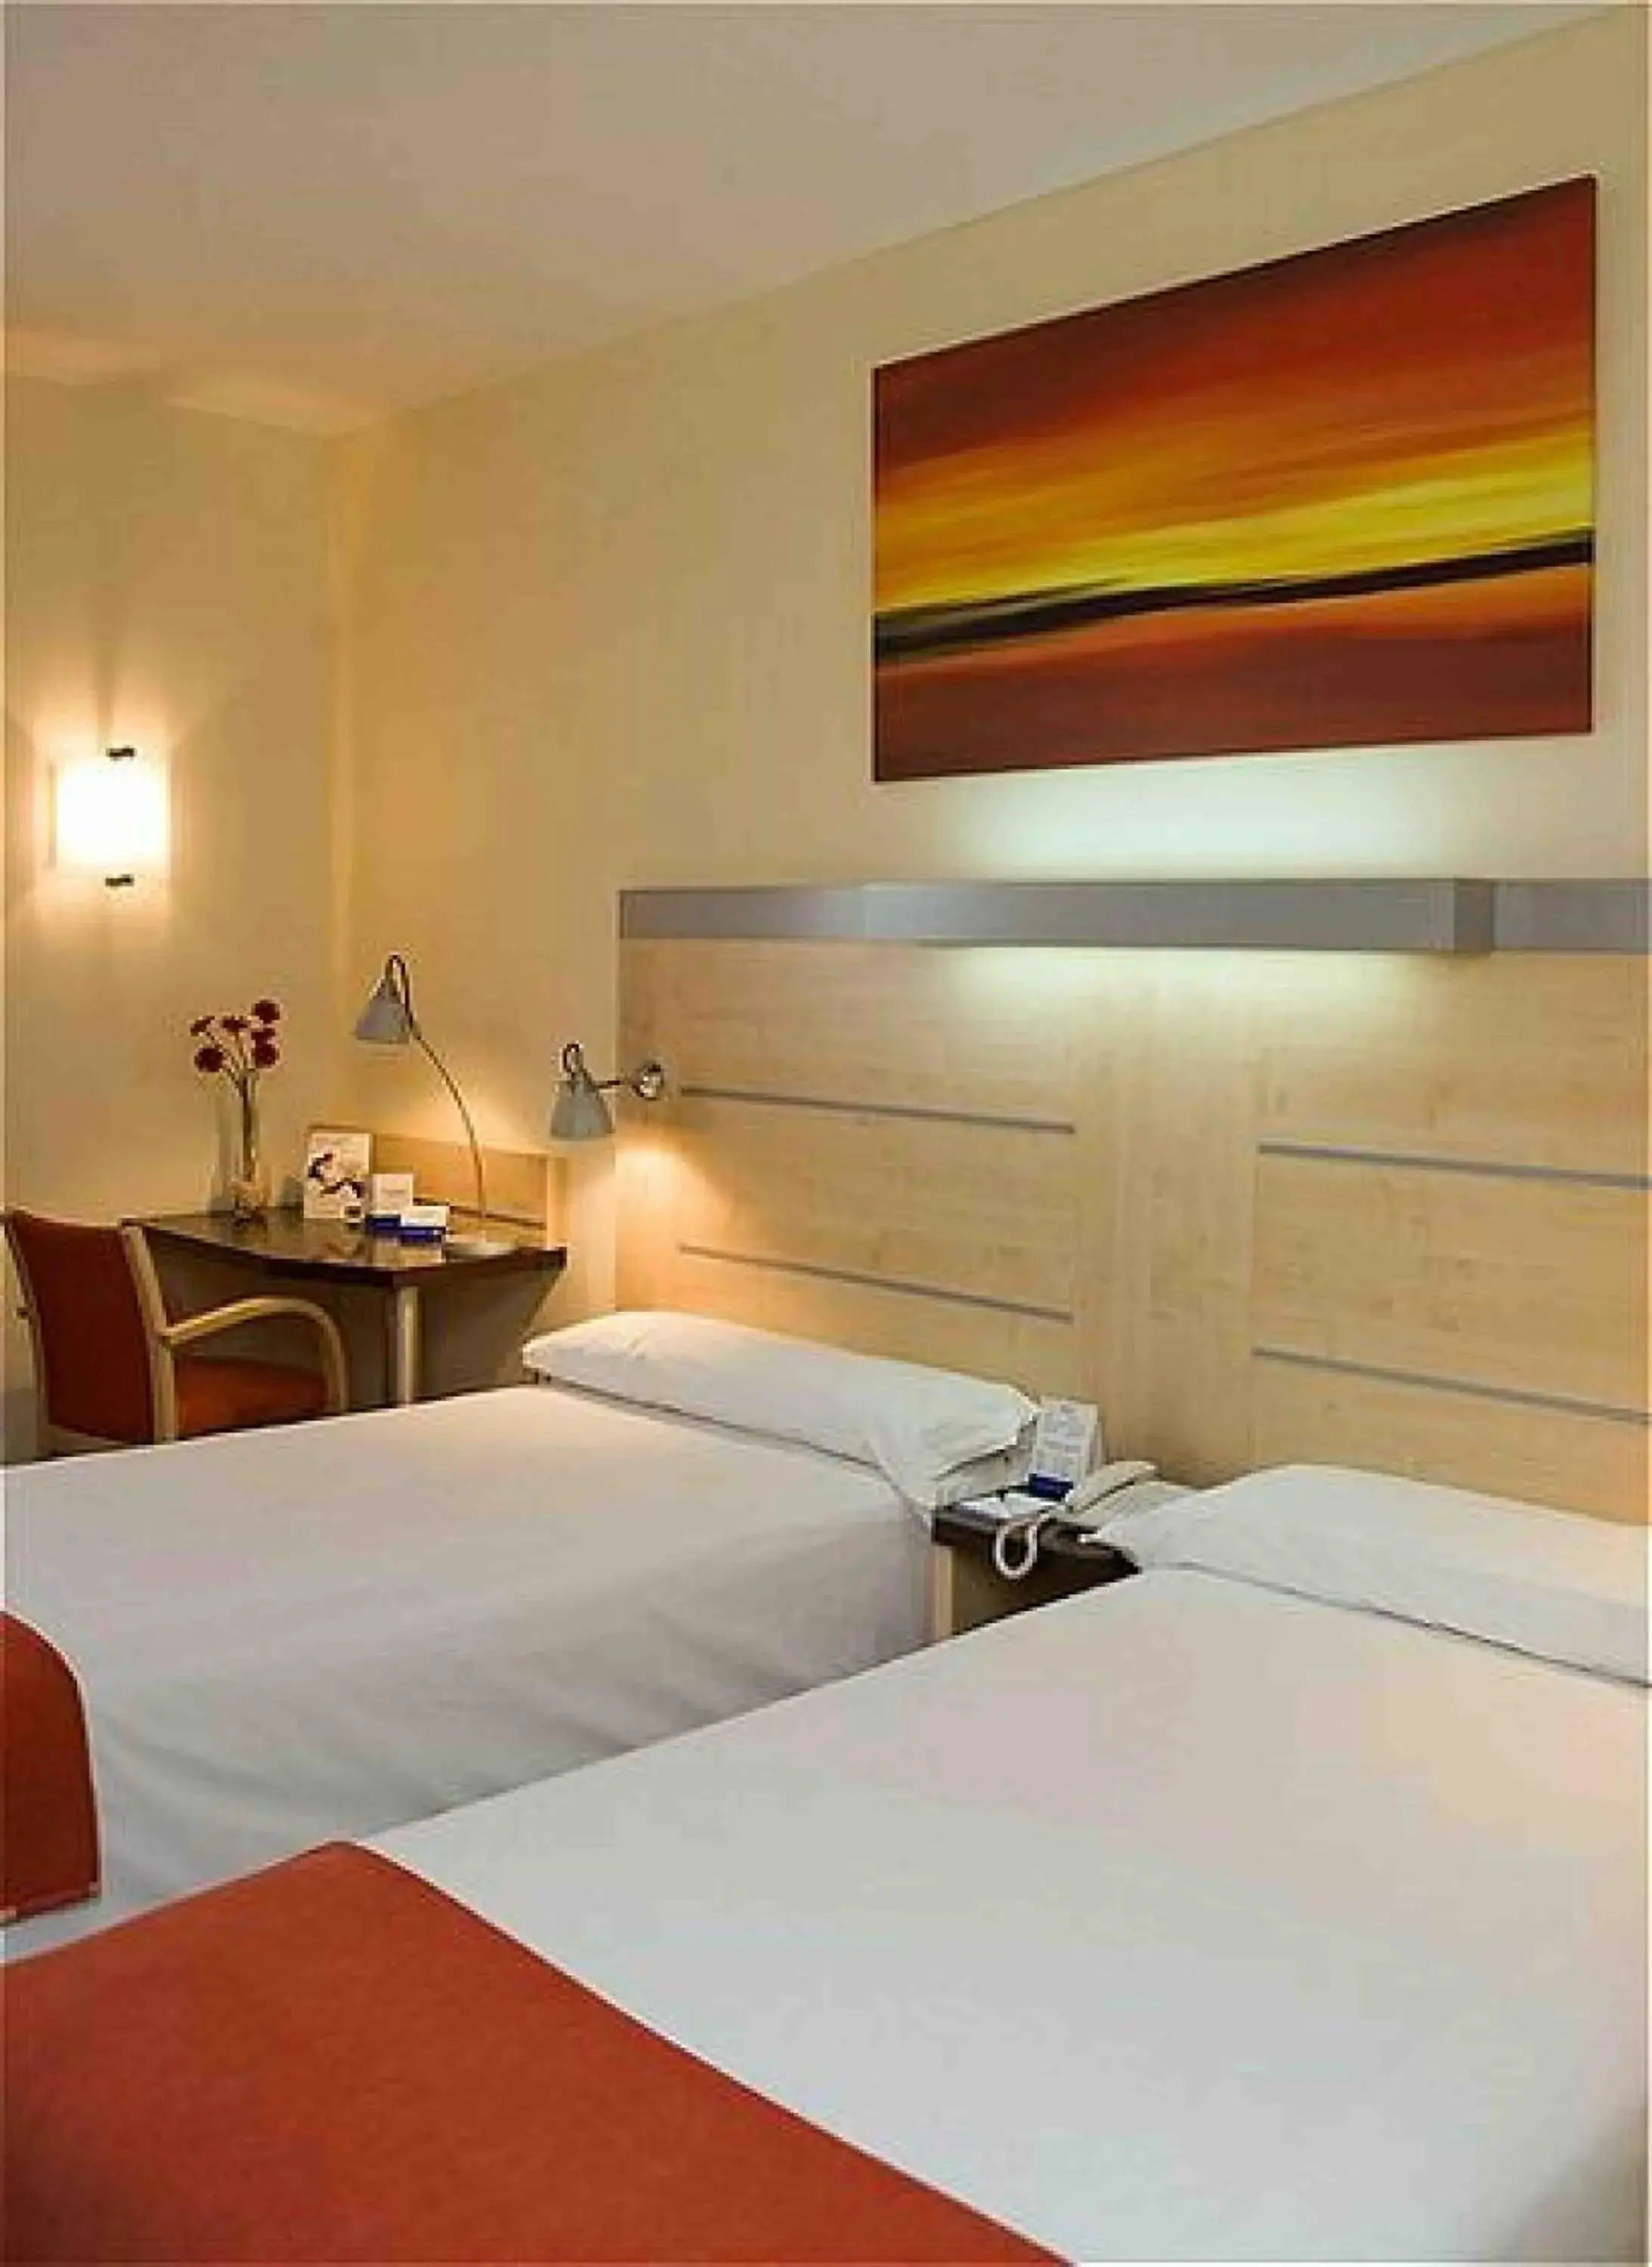 Bed, Room Photo in Holiday Inn Express Alcobendas